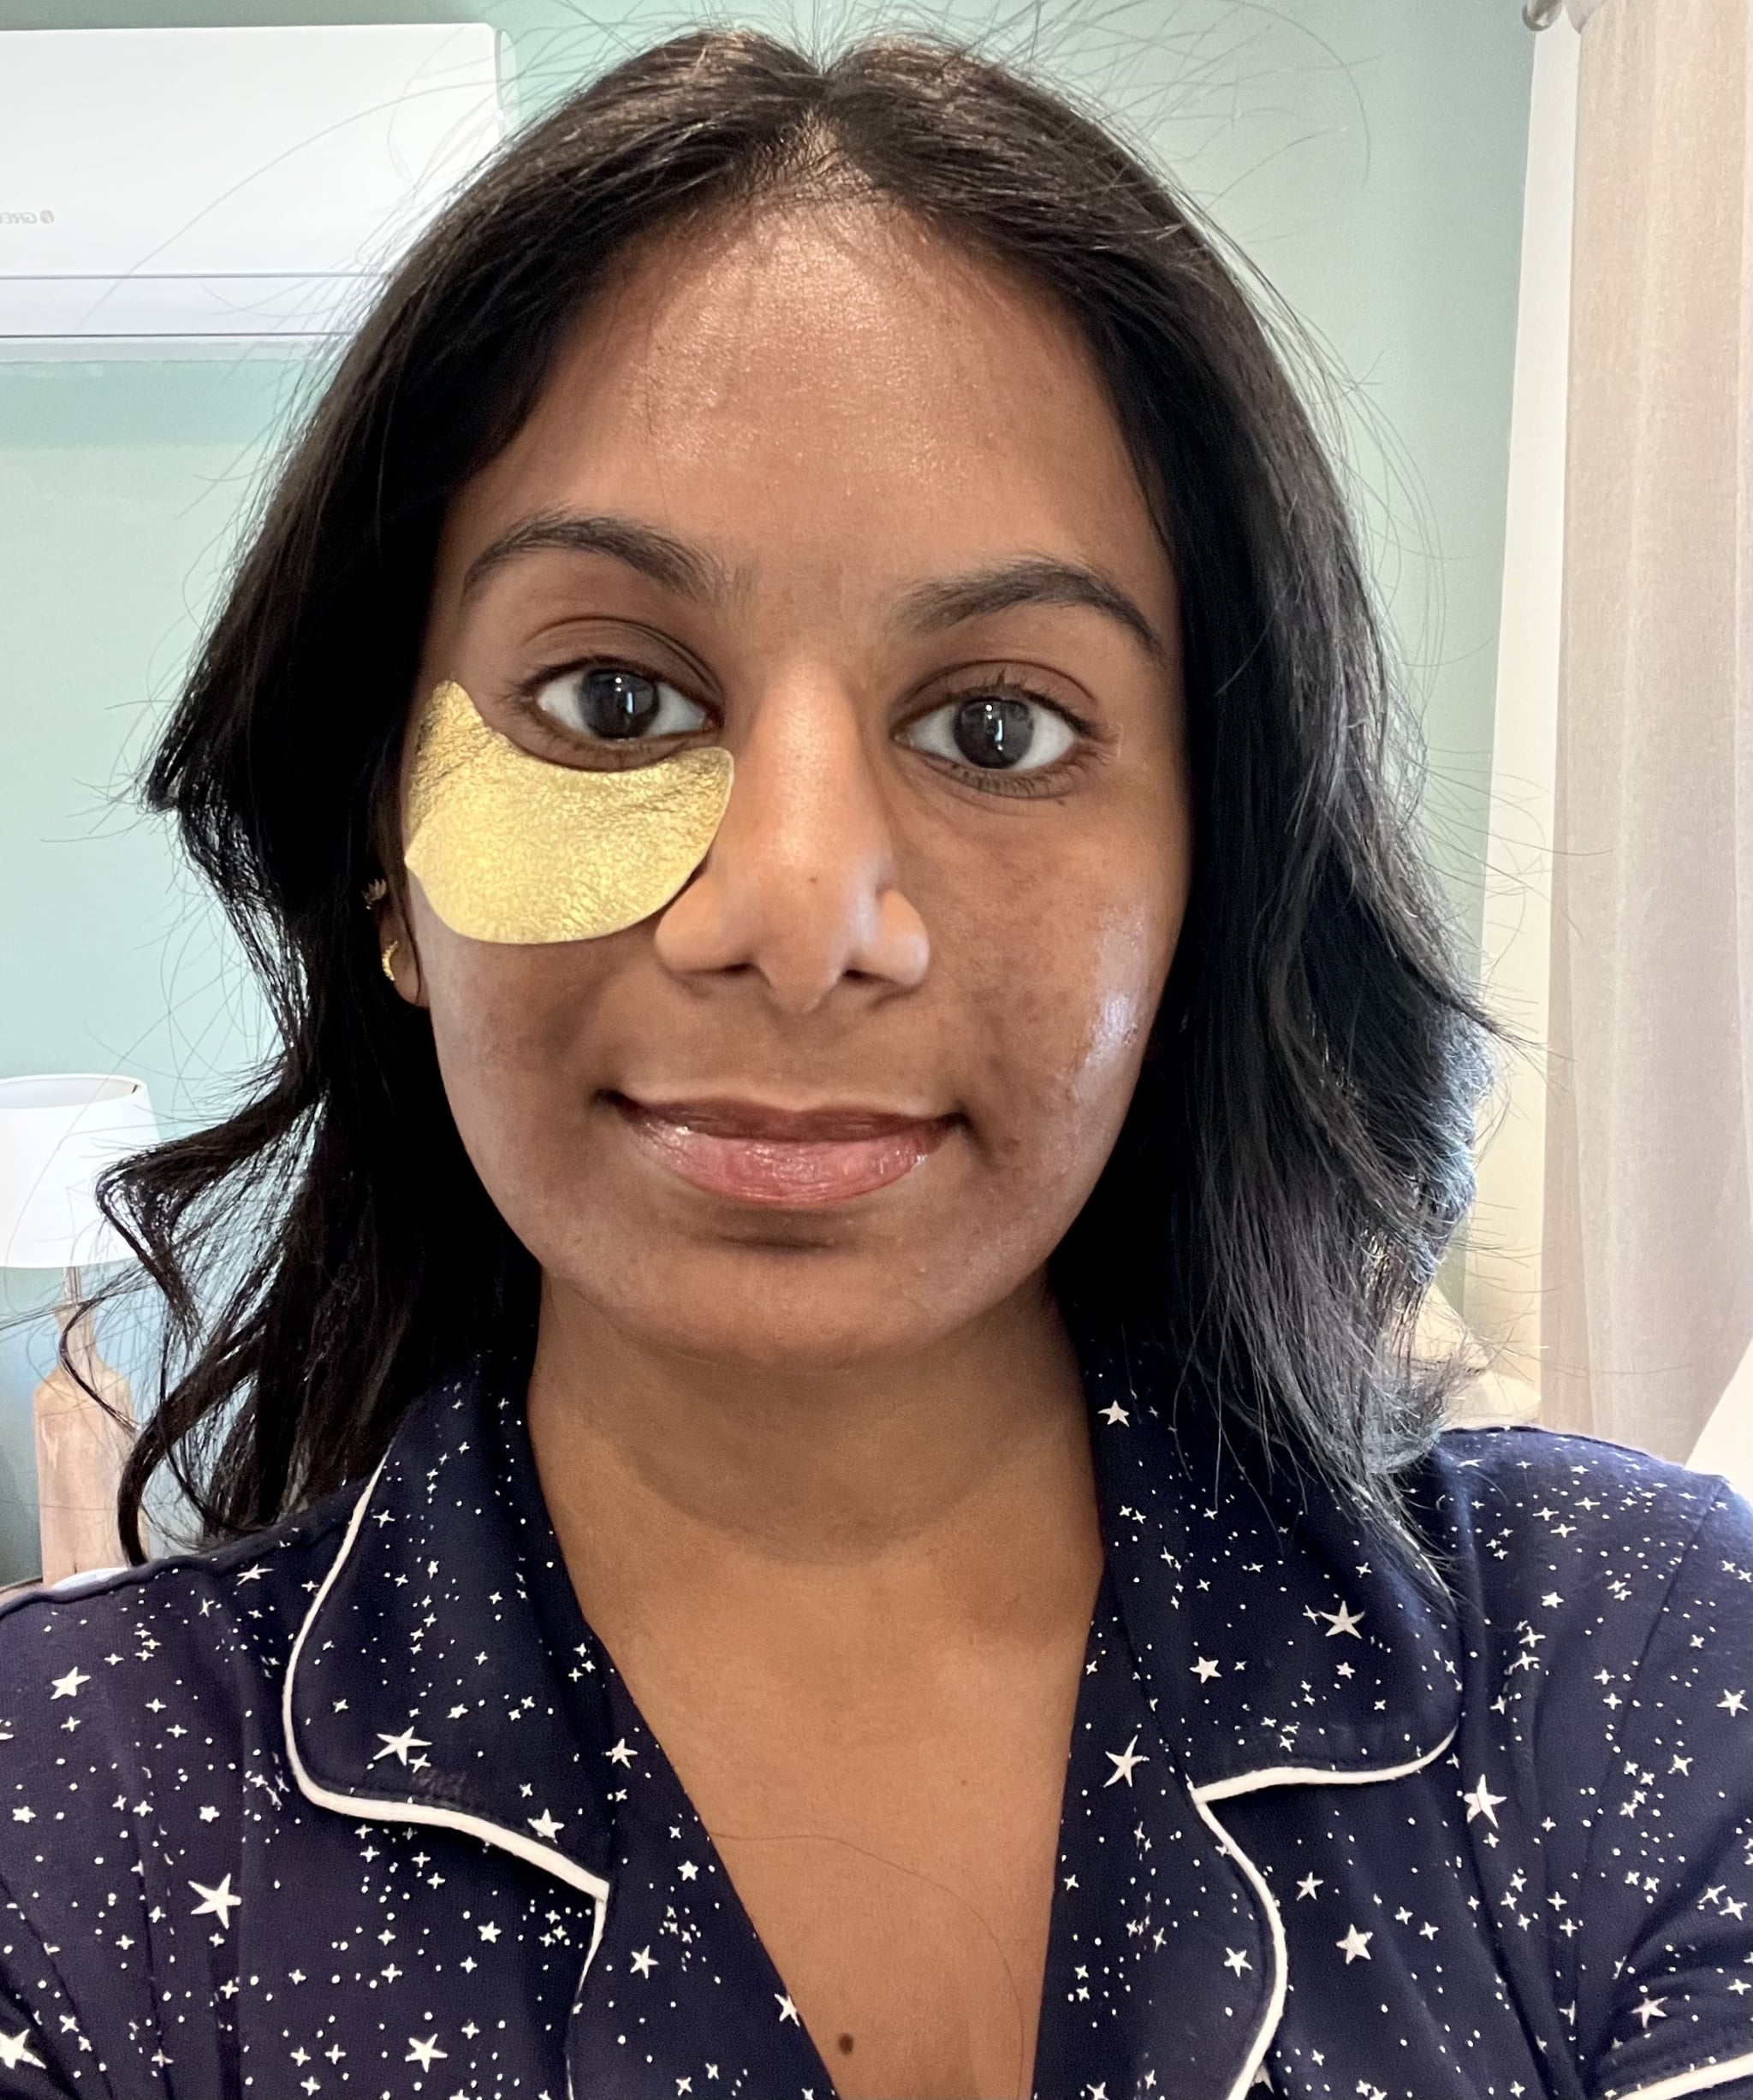 Before and after using the Wander Beauty Baggage Claim Eye Masks. Right side of the woman's face depicts how the eye masks worked to de-puff and awaken the under-eye area. The left side still has the eye patch on.